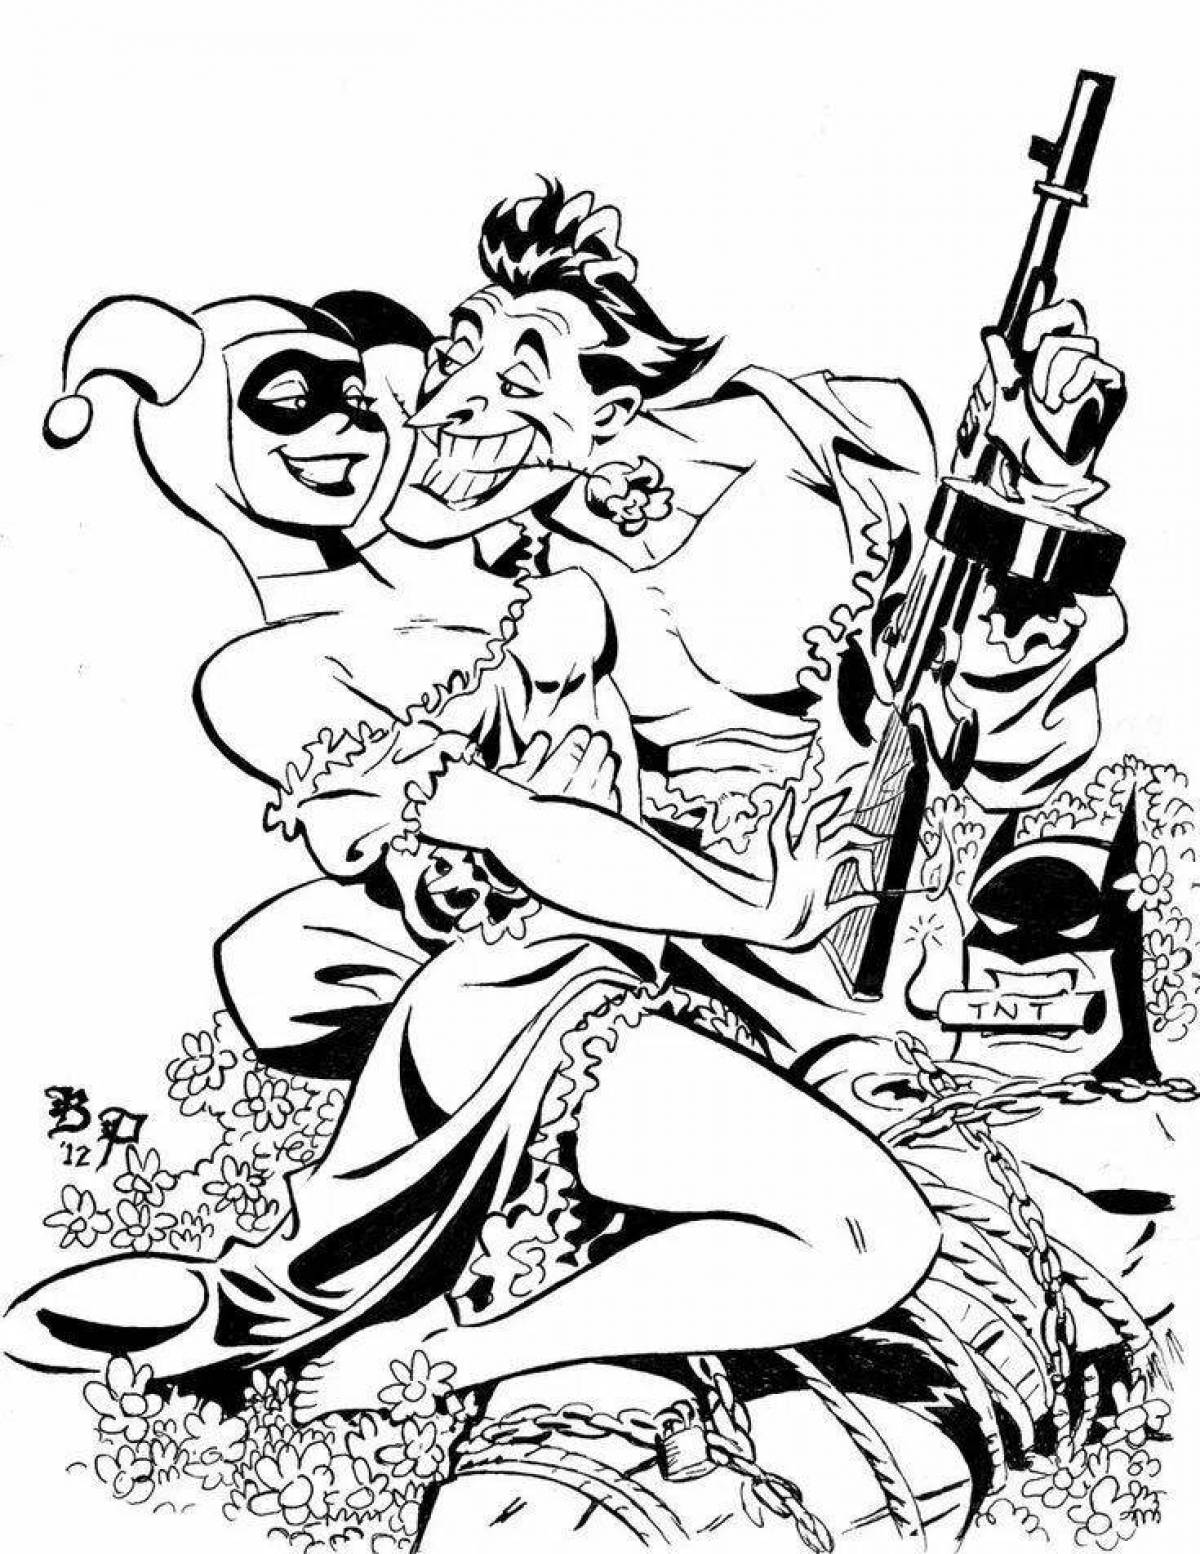 Coloring book funny joker and harley quinn